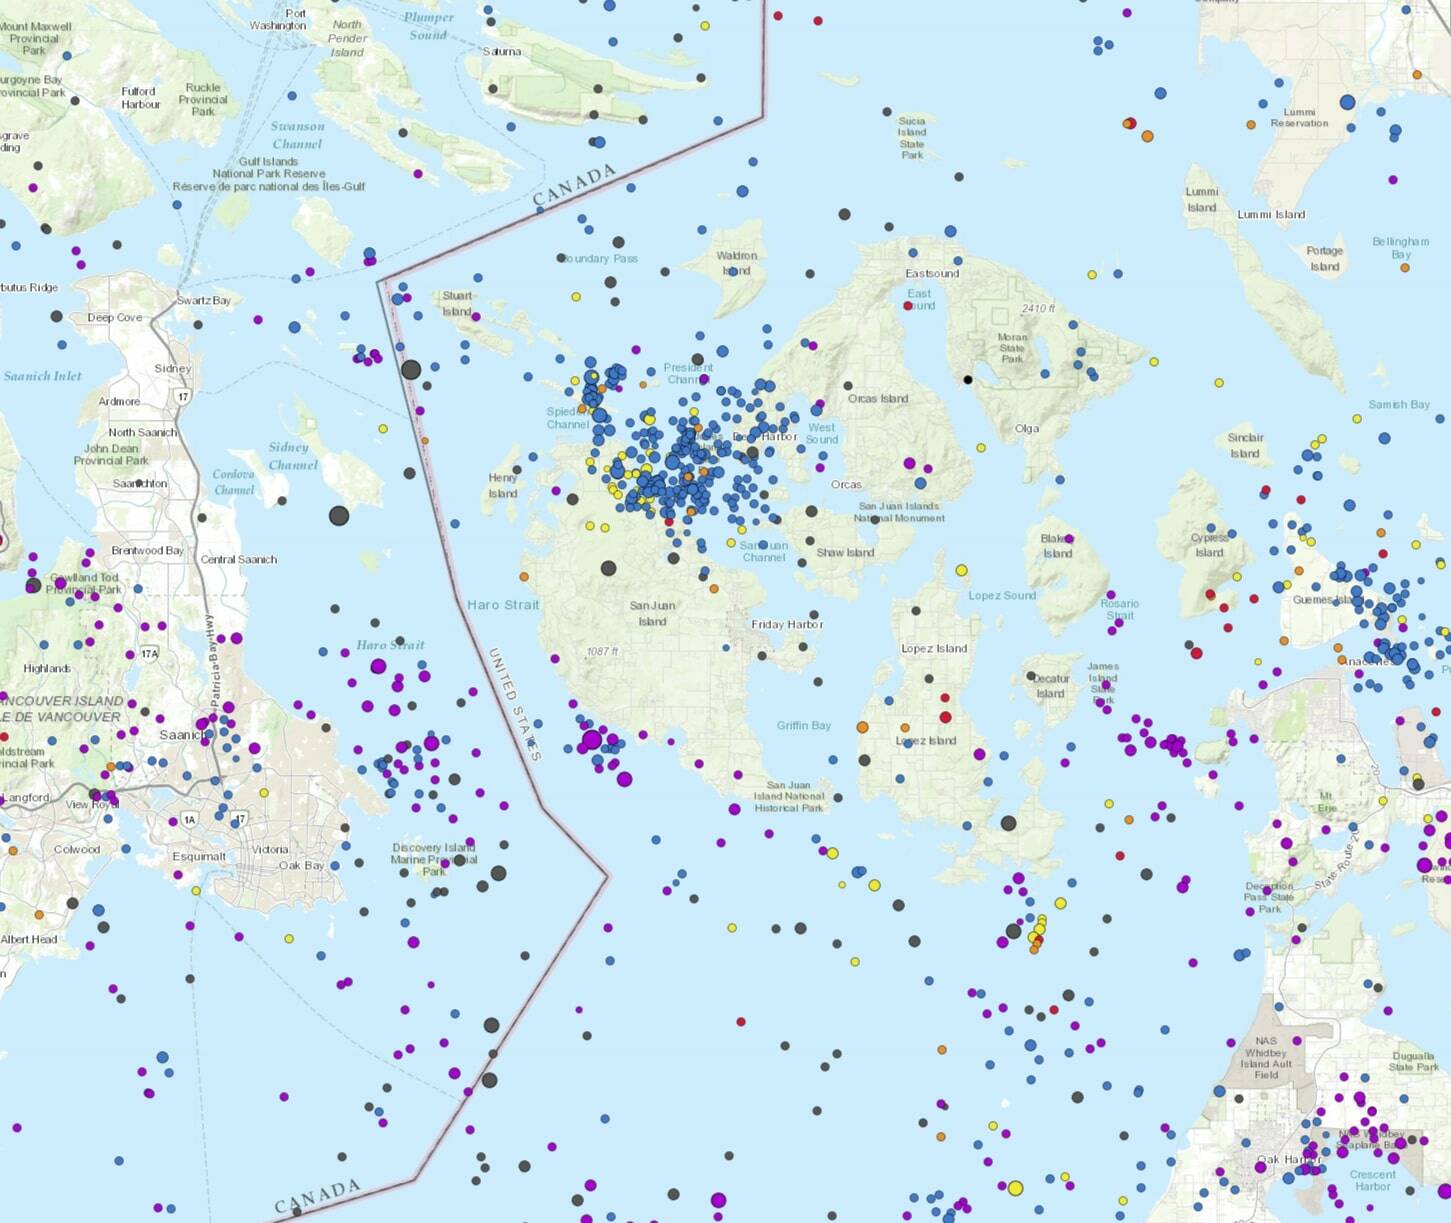 Contributed photo by Pacific Northwest Seismic Network at the University of Washington (pnsn.org)
Earthquakes across the Salish Sea since 2000.